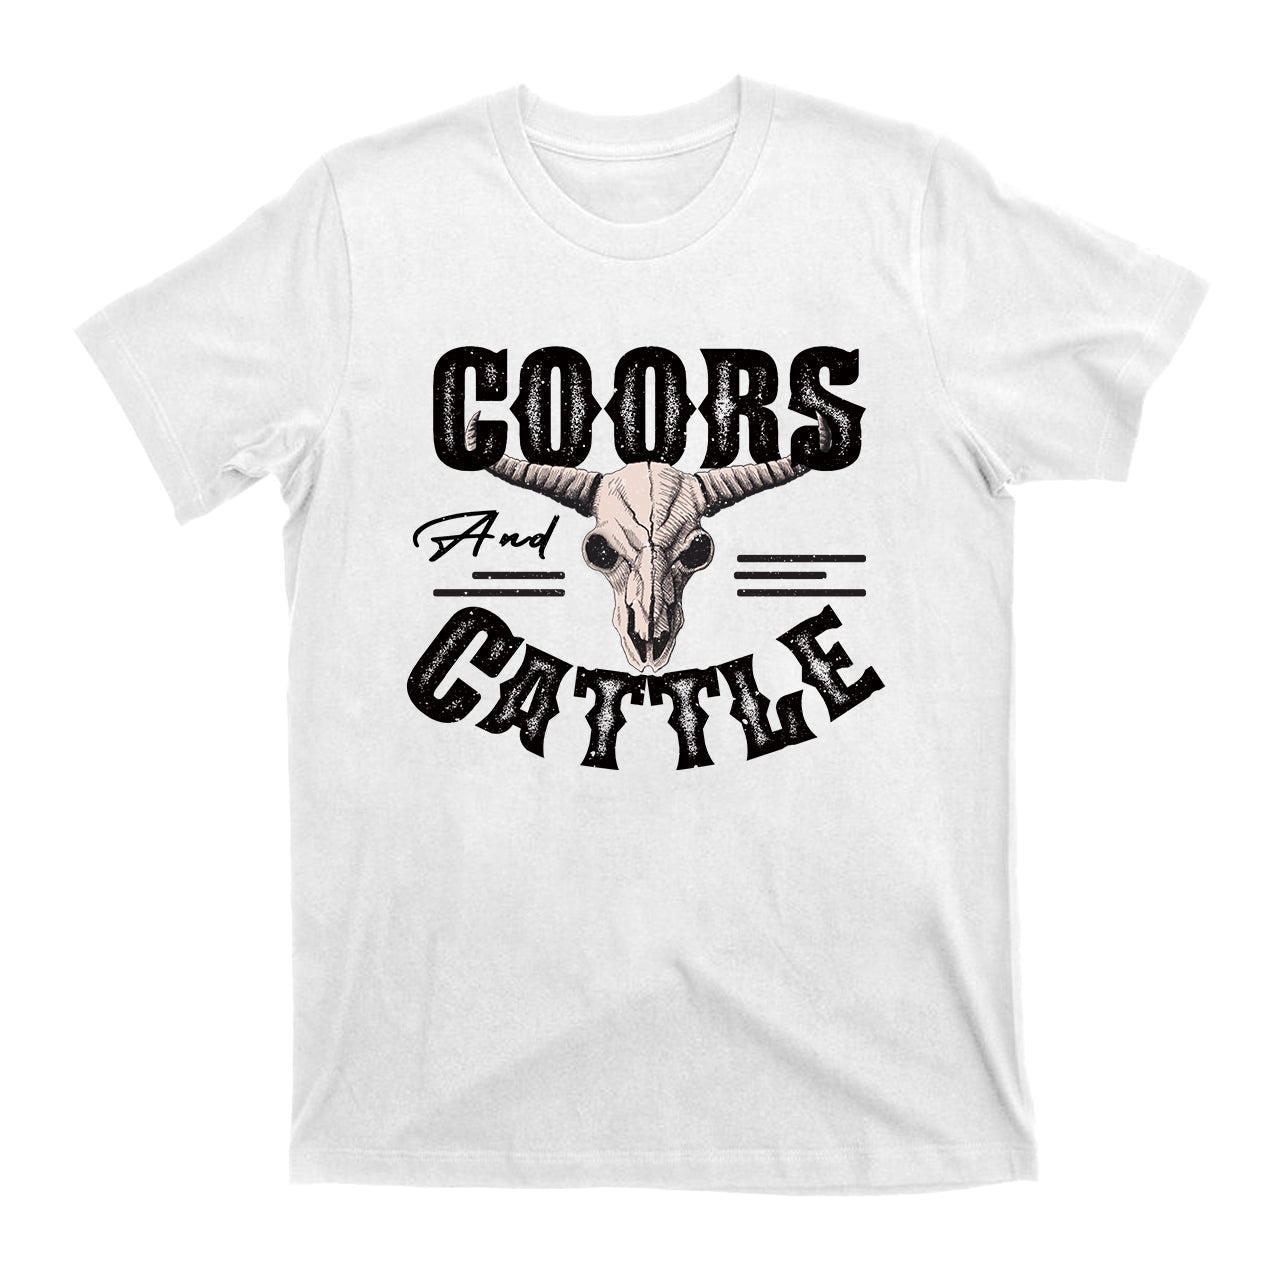 Coors And Cattle Cowboy T-Shirts